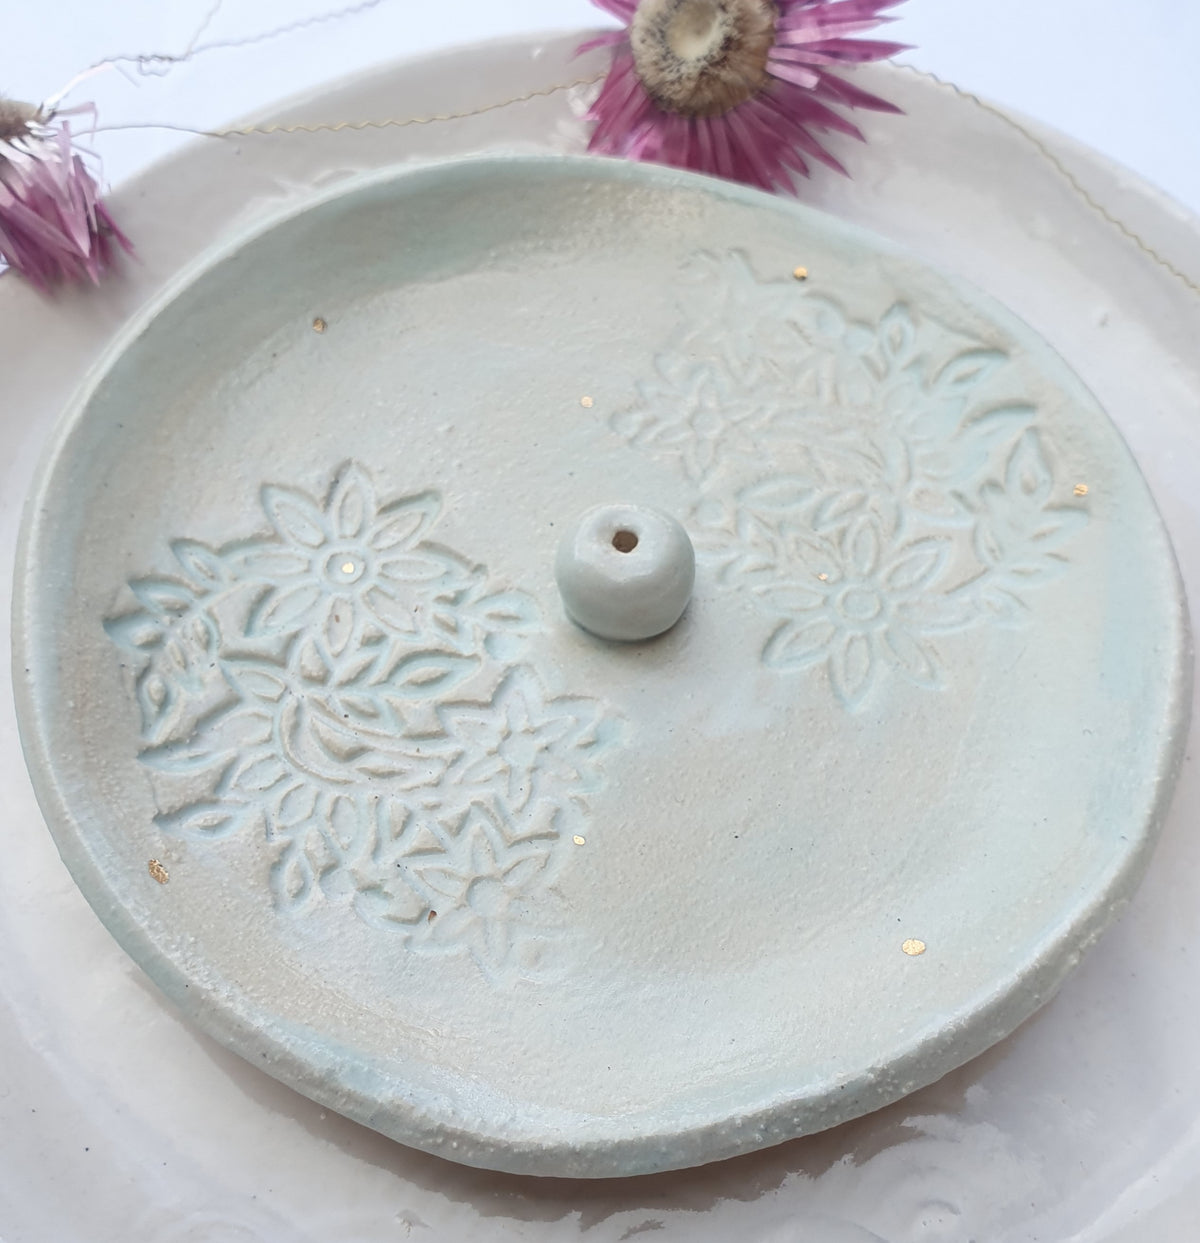 Small incense holder - Pale blue with botanical print